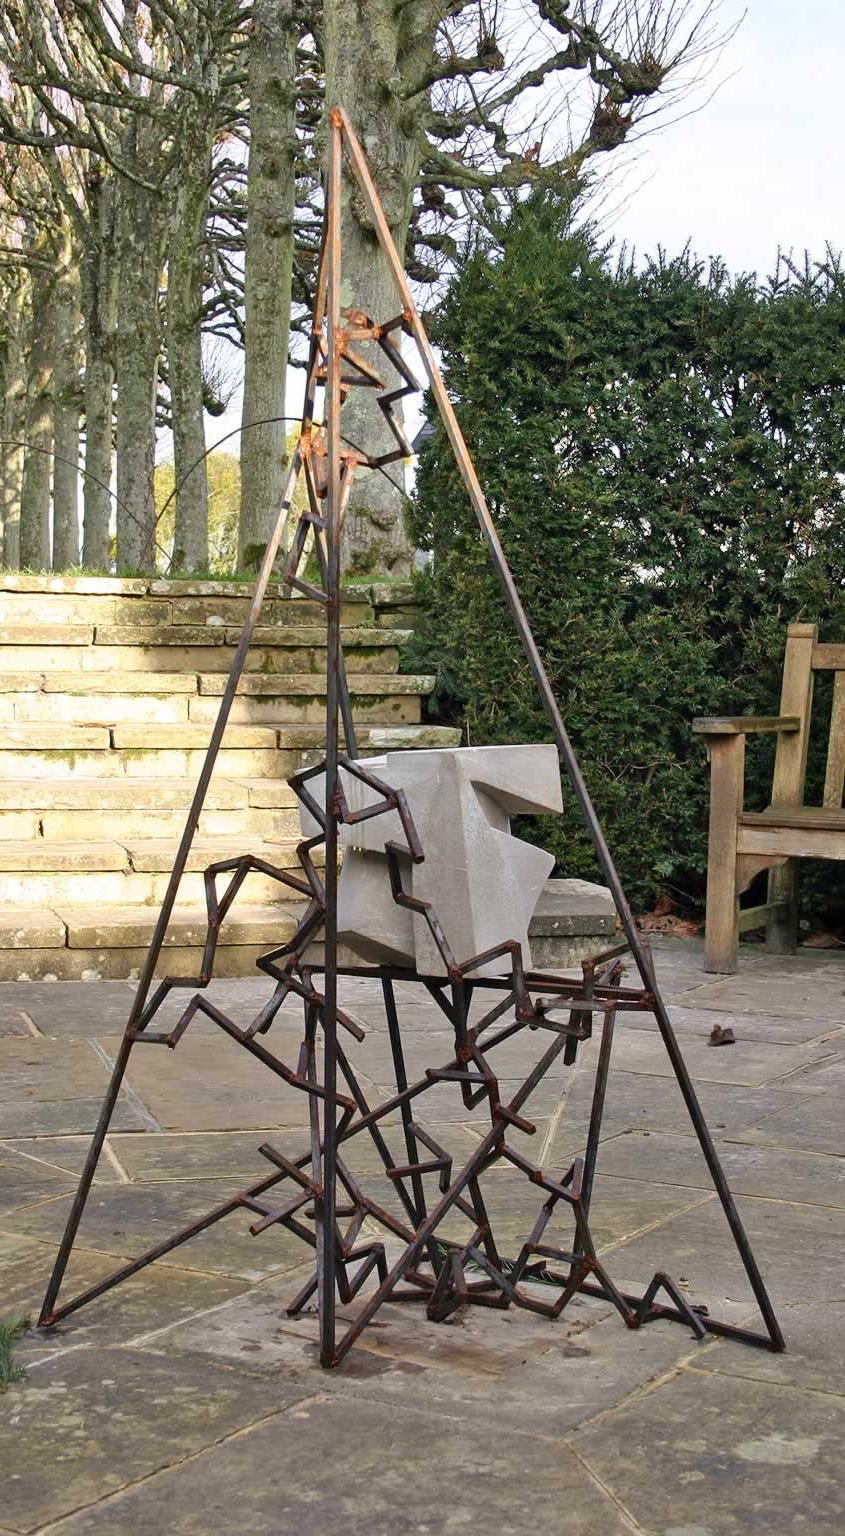 Triangulum at Mottisfont Abbey (abstract sculpture) by sculptor Ian Campbell-Briggs